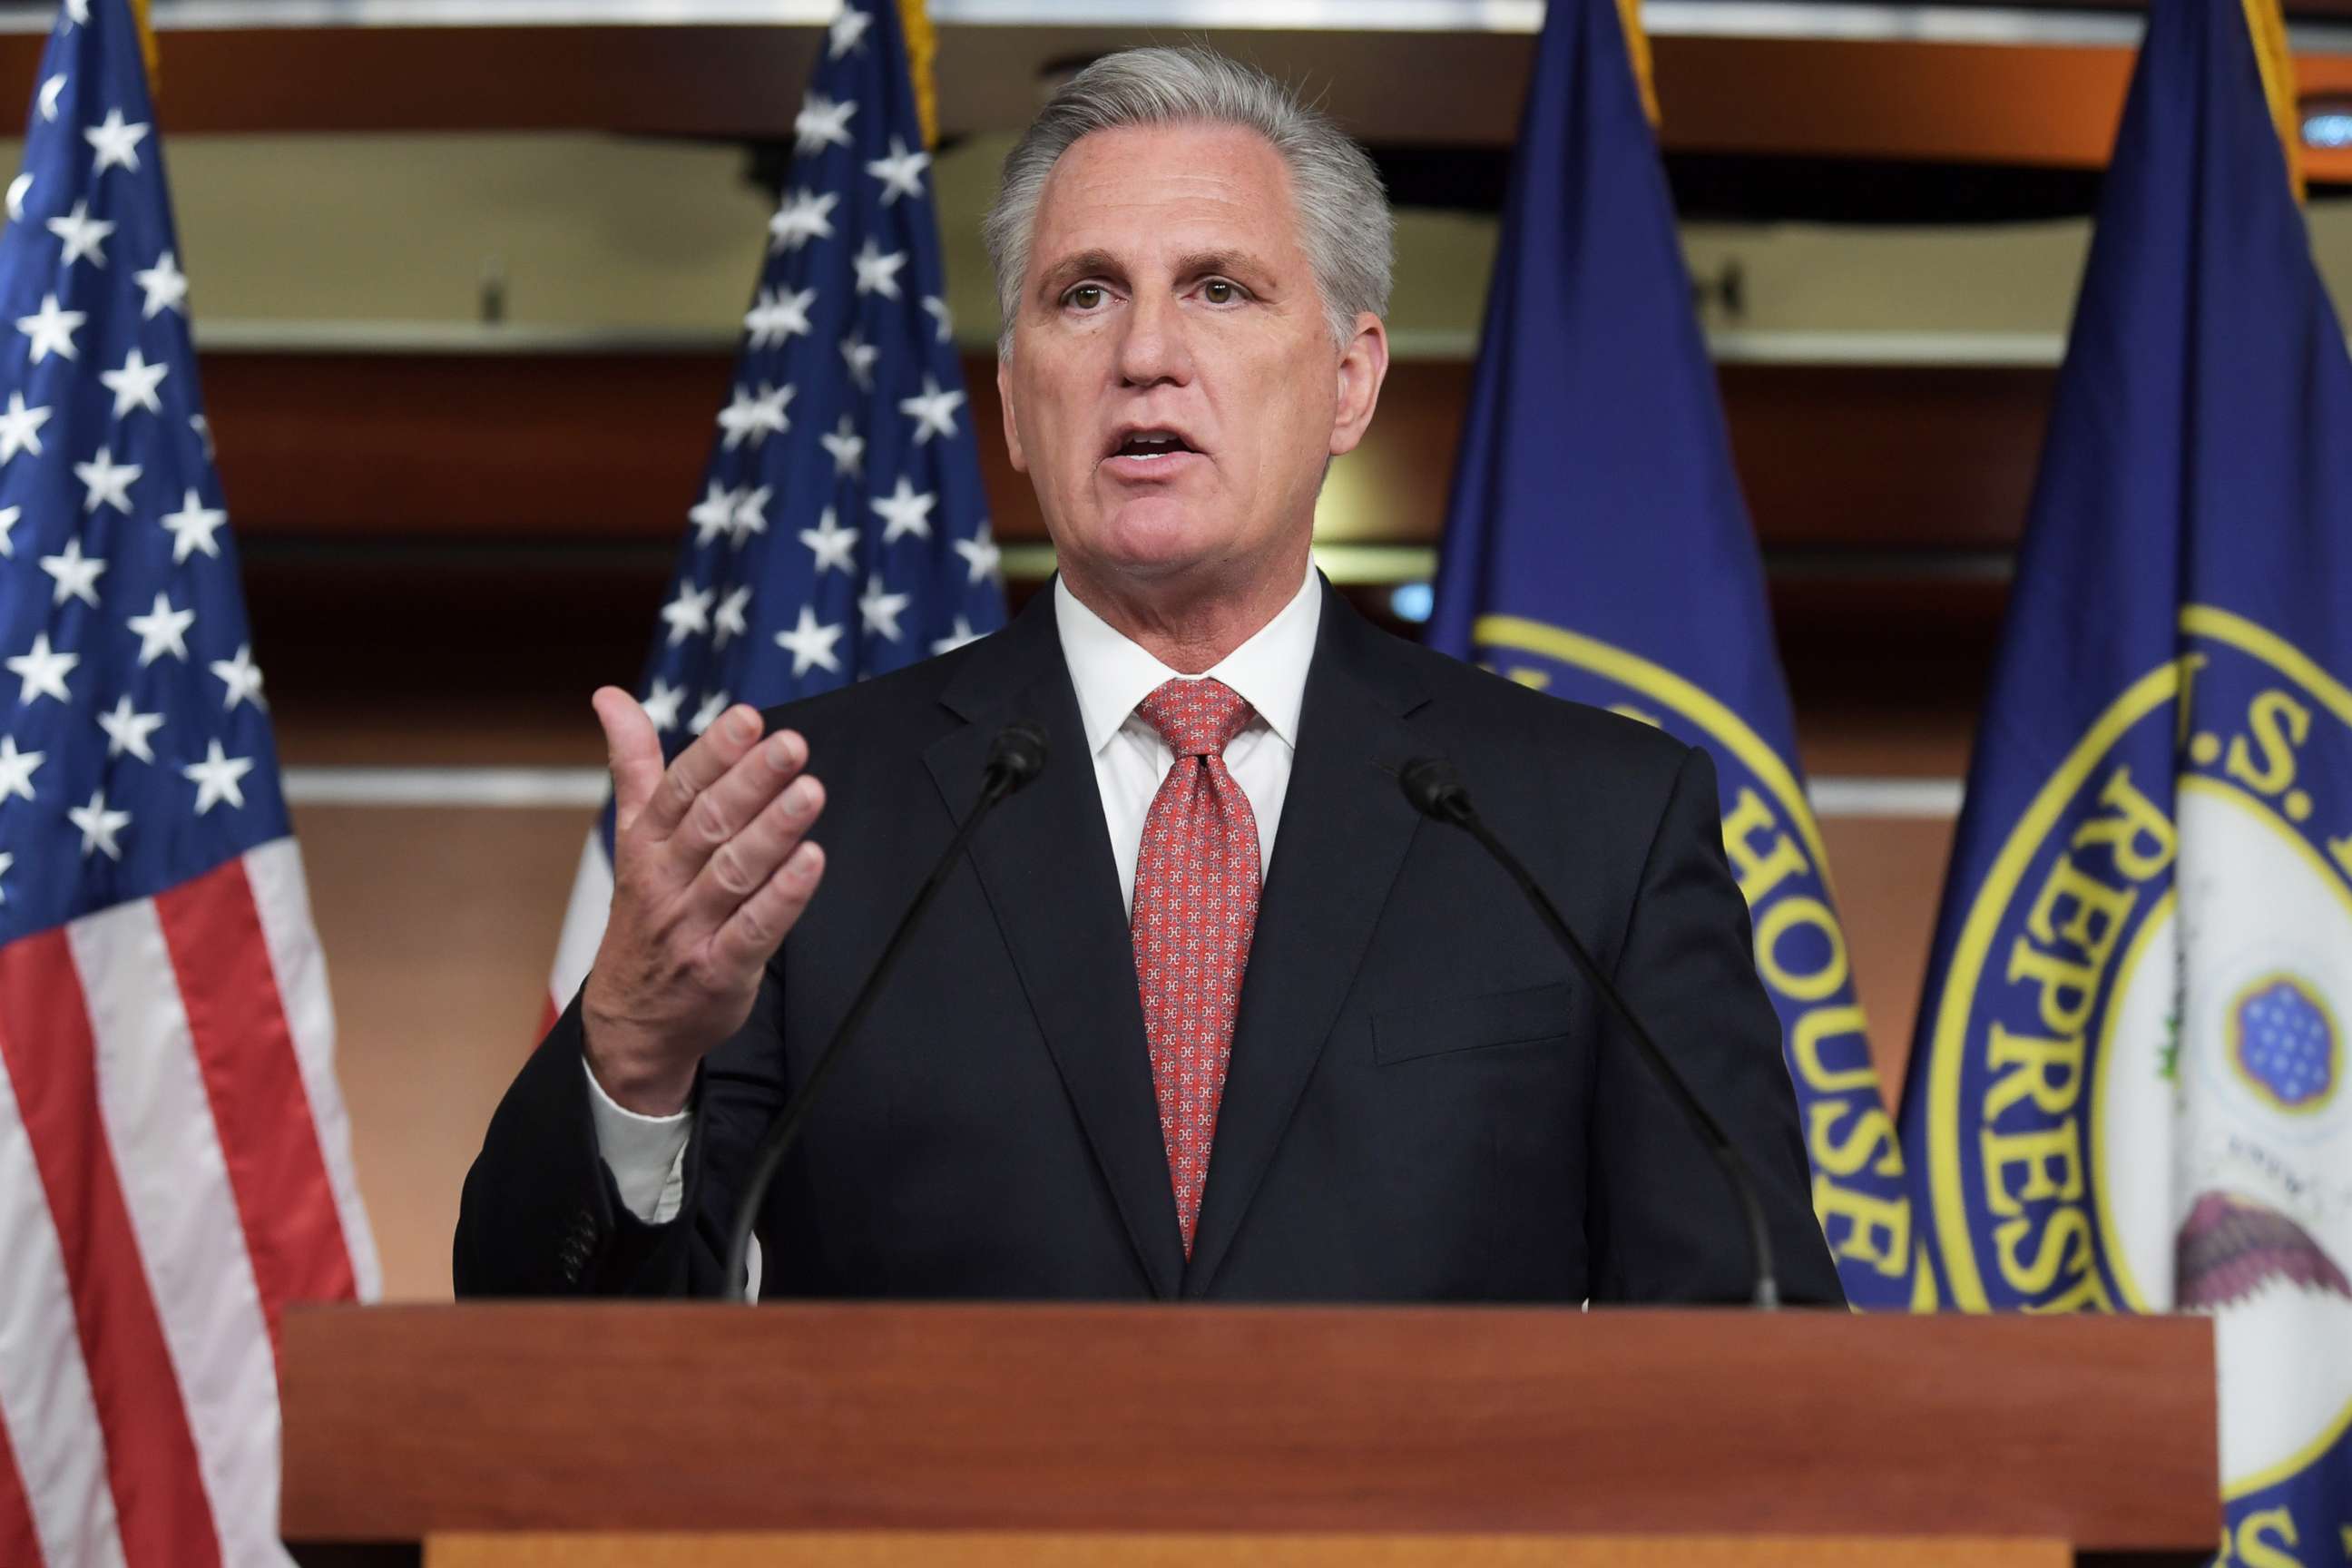 PHOTO: U.S. House Minority Leader Kevin McCarthy speaks about Afghanistan during his weekly press conference on Capitol Hill in Washington, D.C., Aug. 25, 2021.